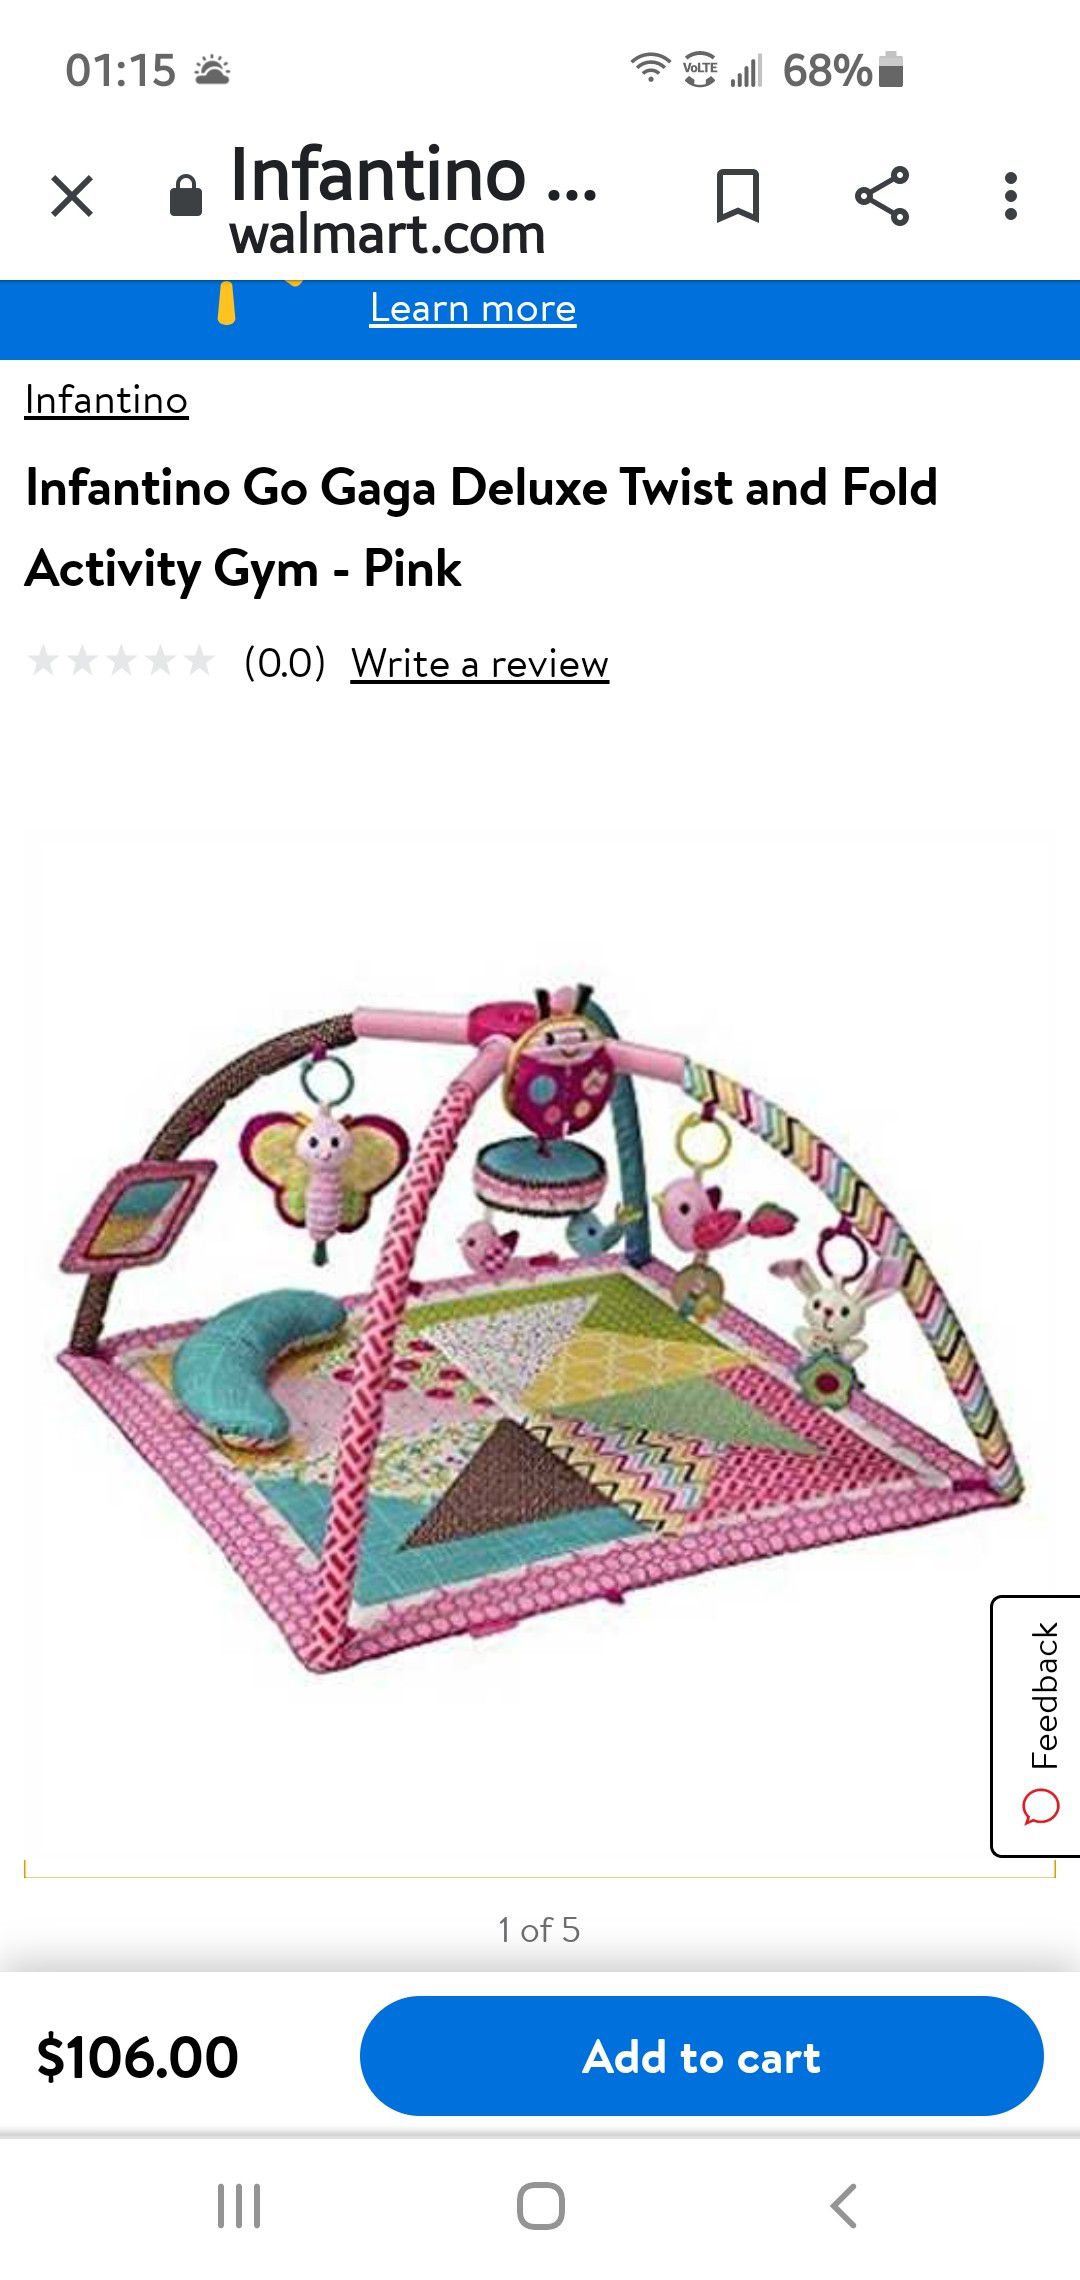 Baby Go Gaga Delux Twist and fold activity gyn and play mat